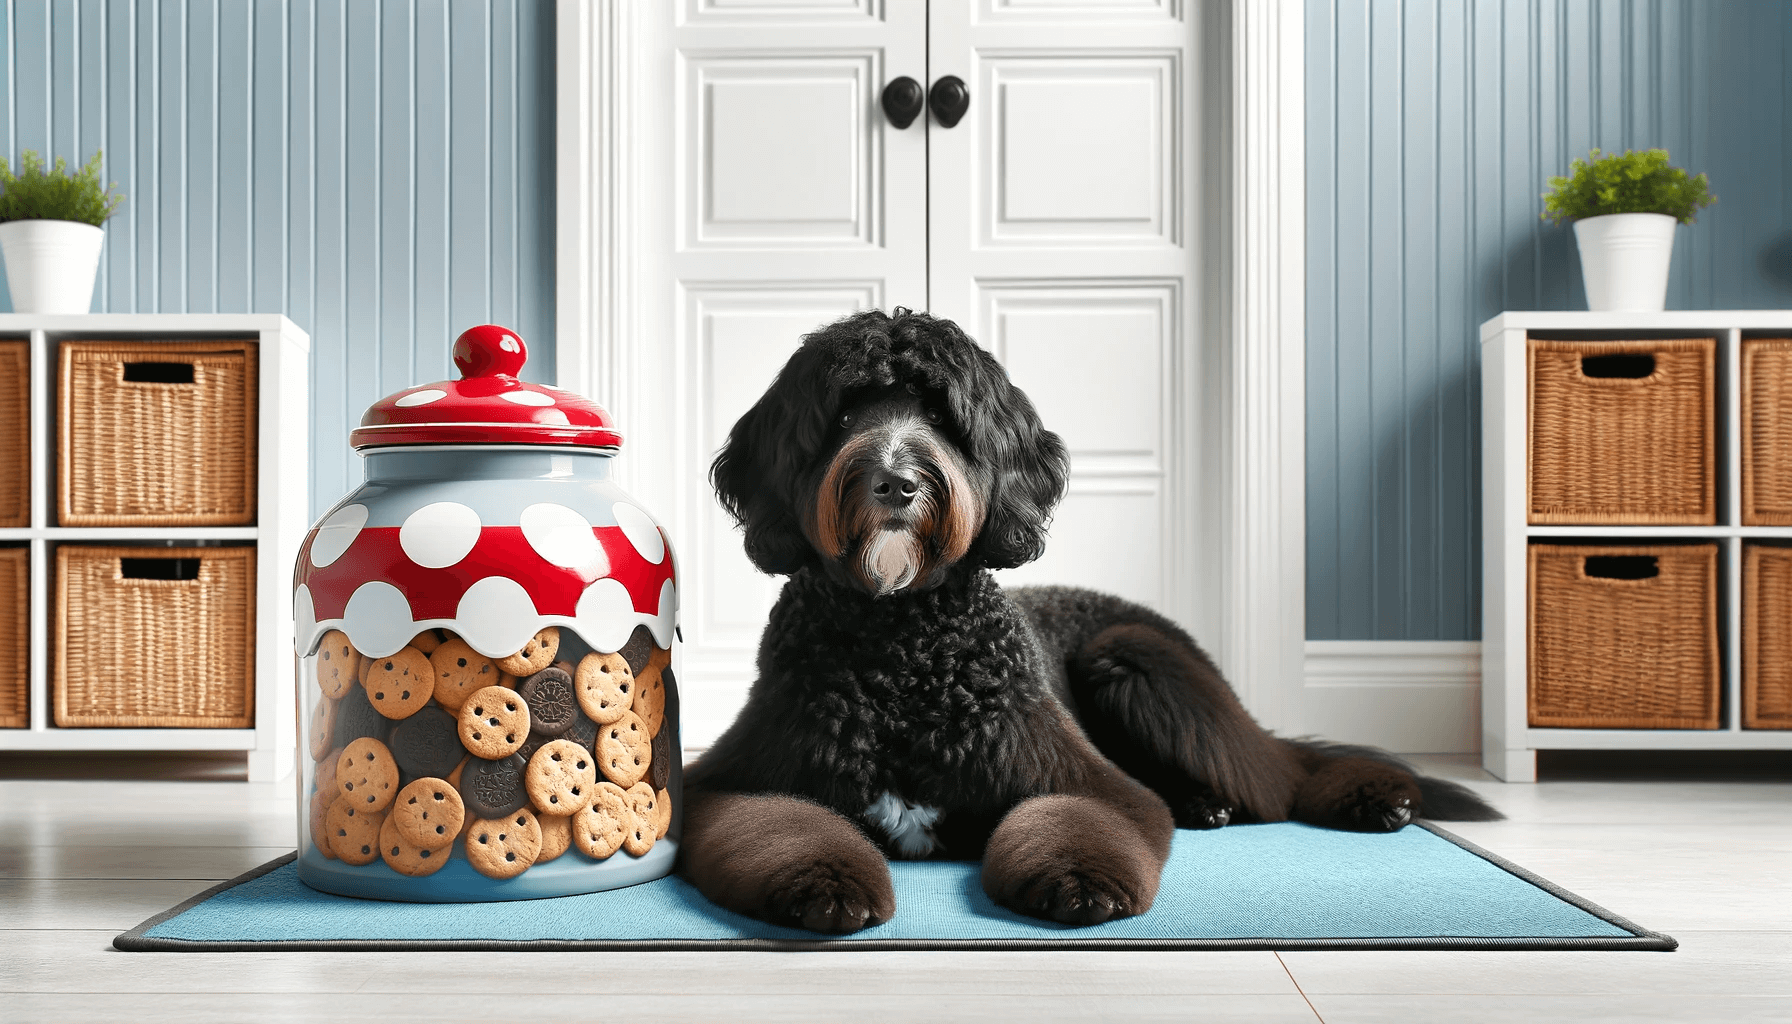 Black Aussiedoodle lying down next to a large red and white cookie jar on a blue mat against a backdrop of white doors